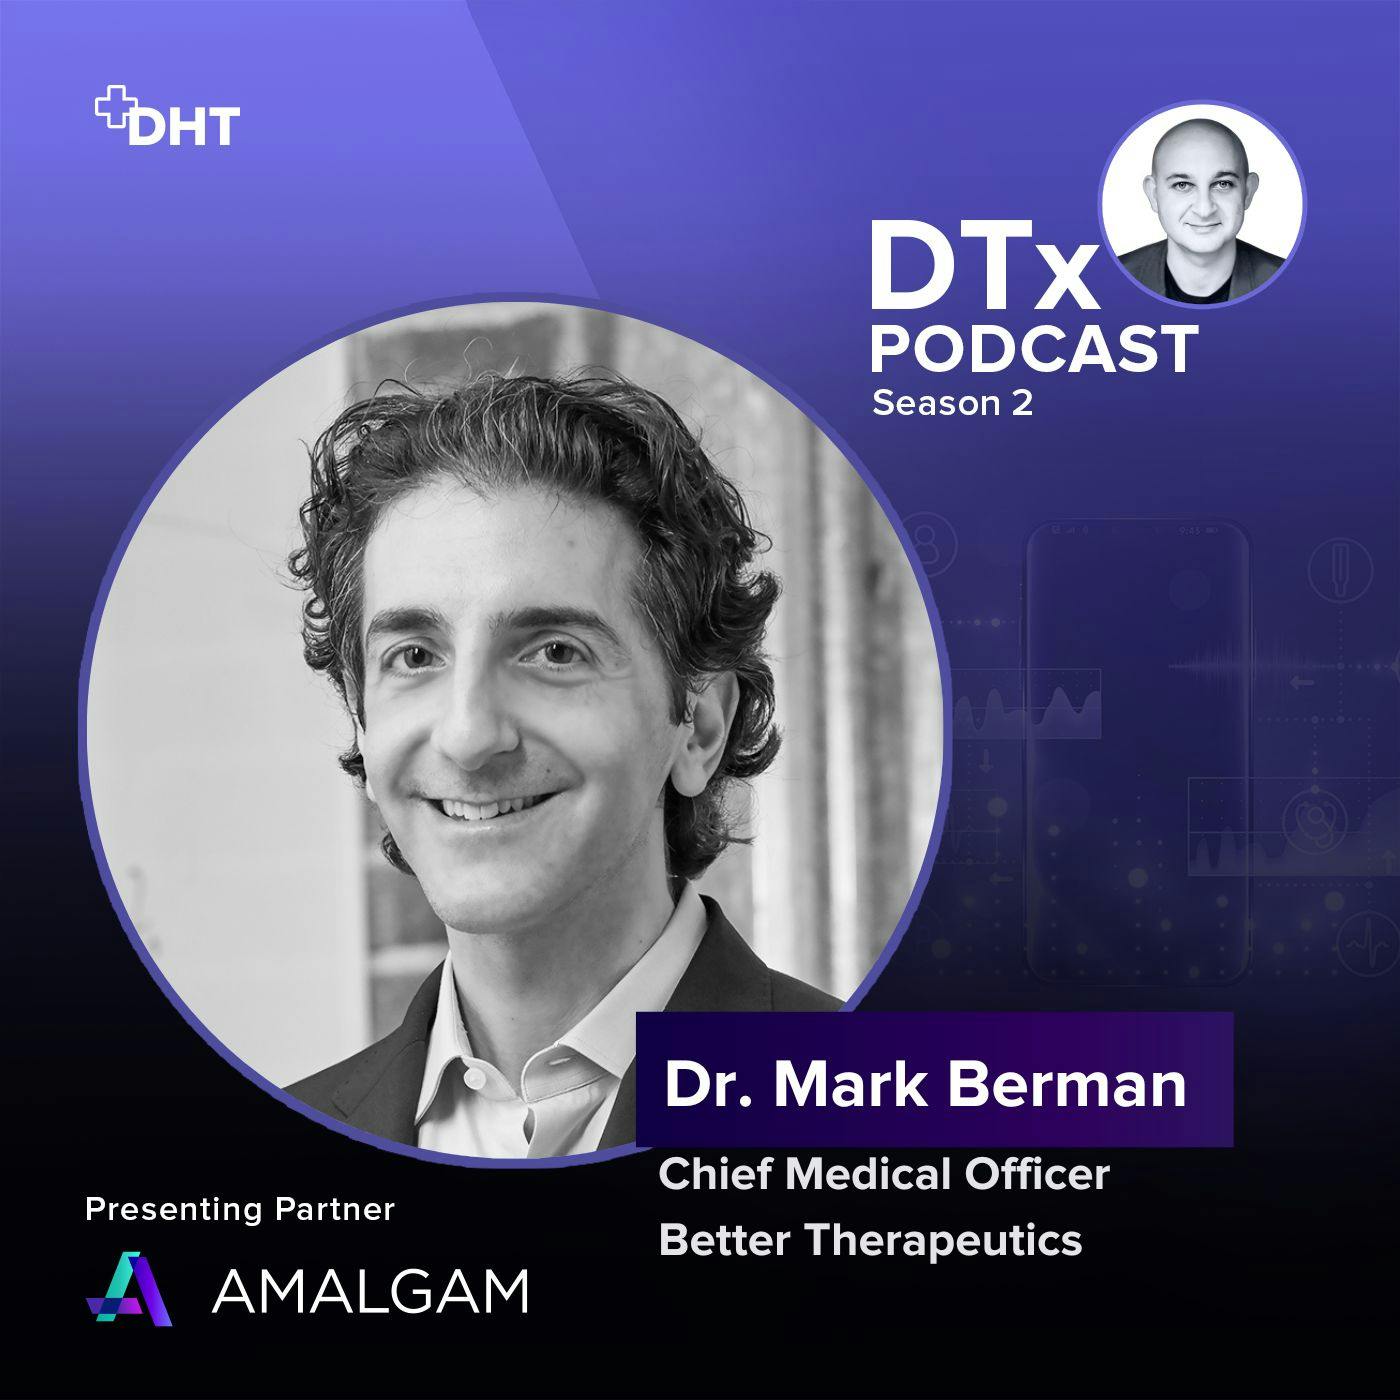 Replay: Treating Disease Progression with DTx: Dr. Mark Berman Shares Insights on Innovative Prescription Digital Therapeutics